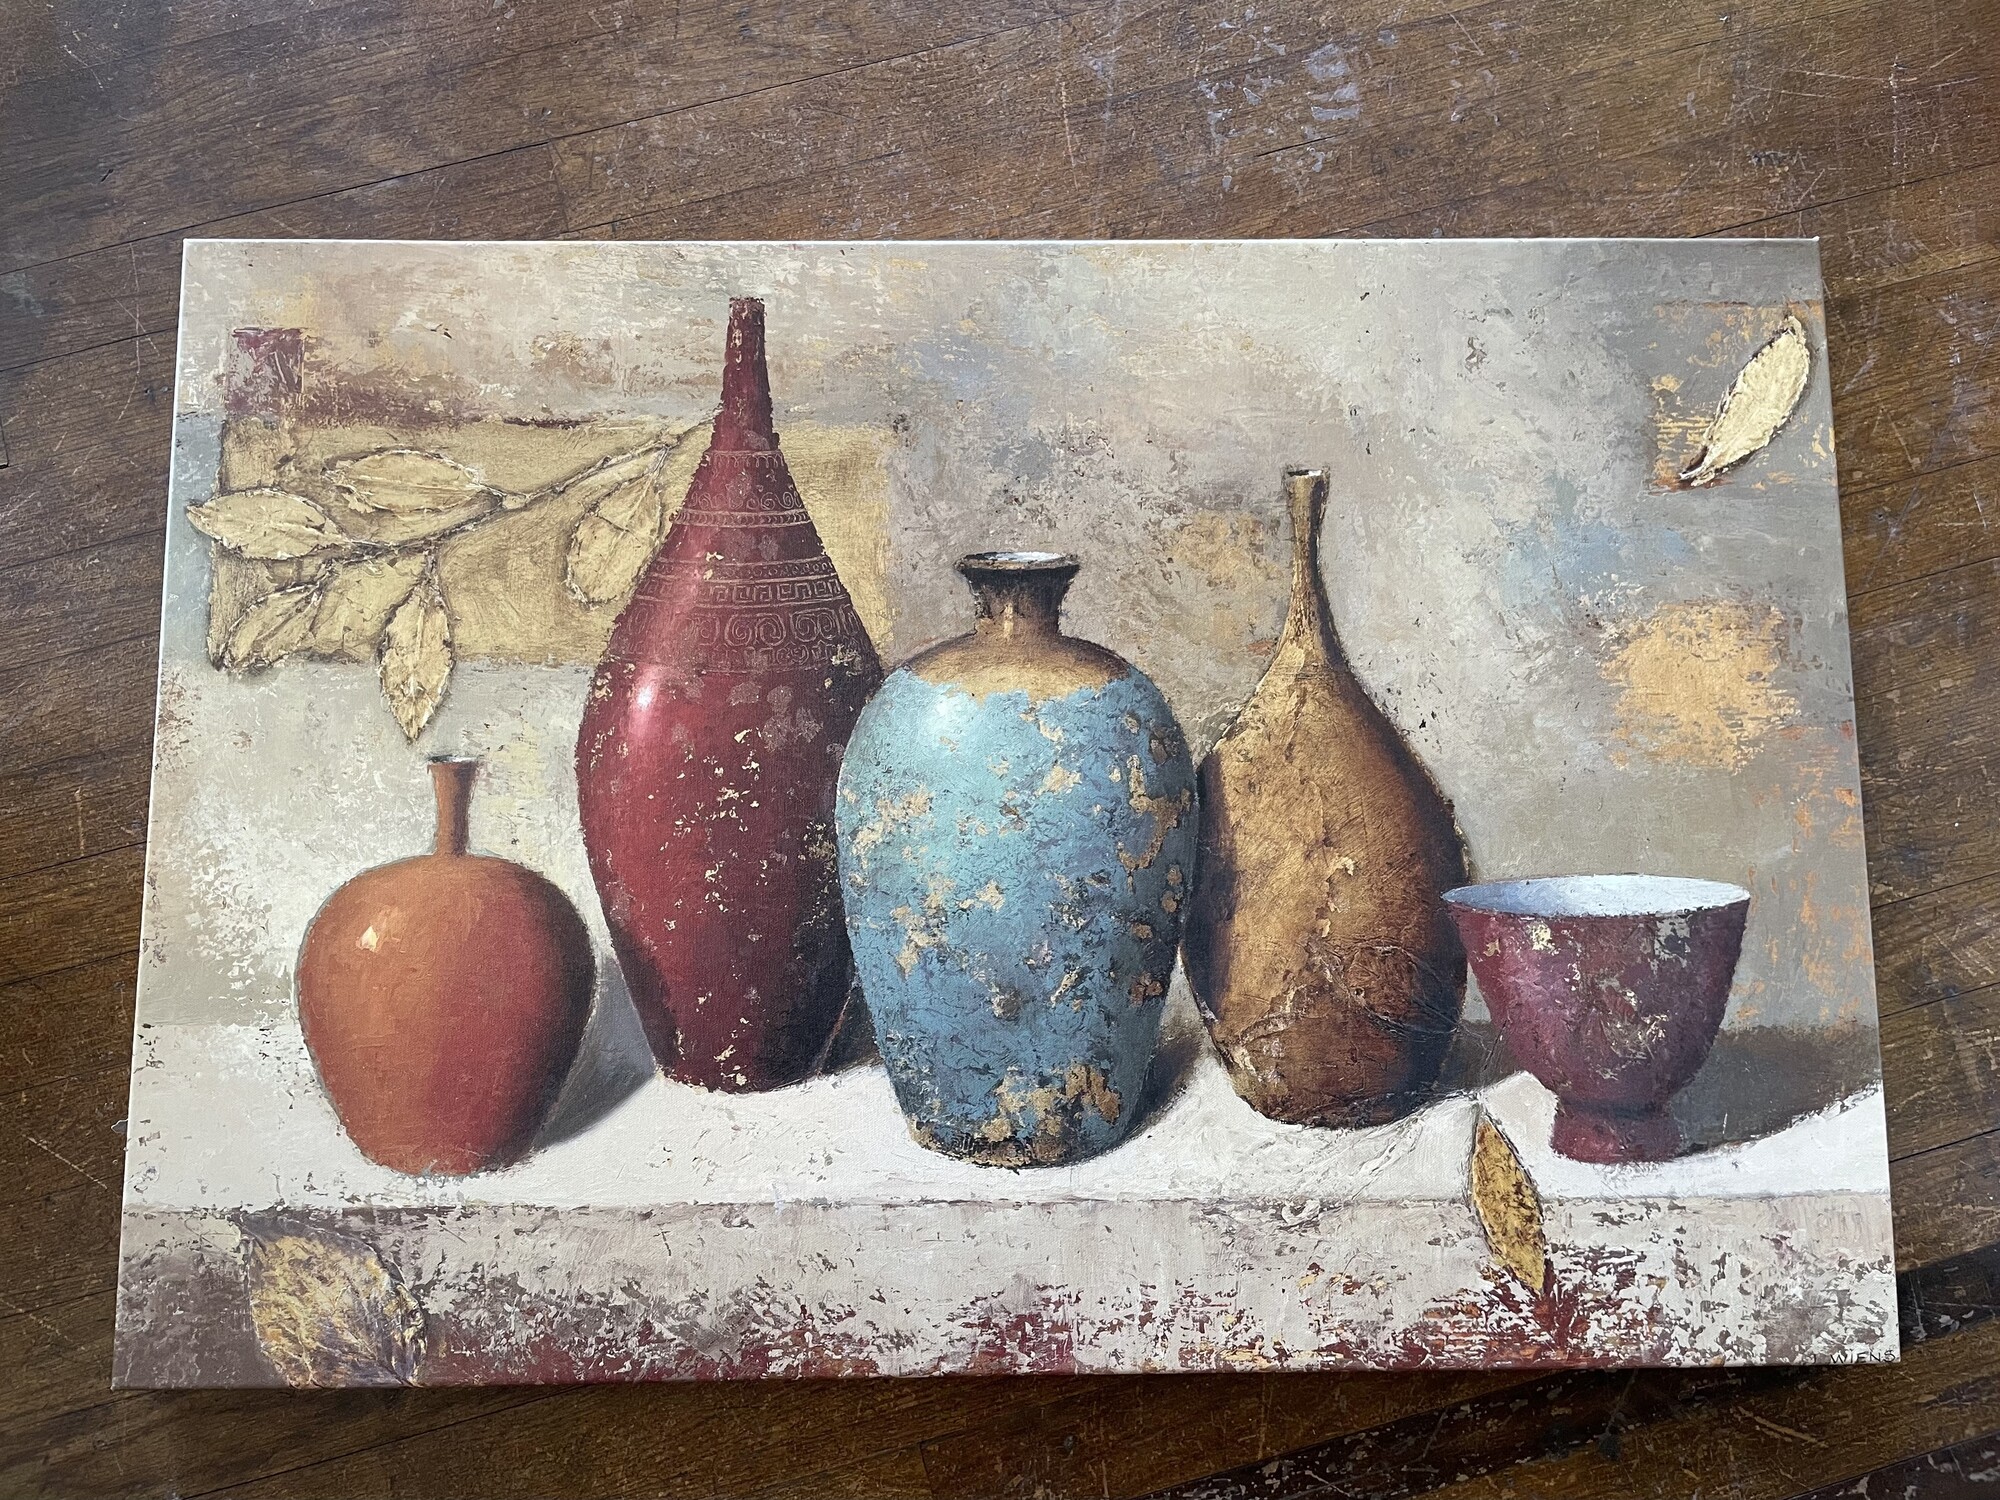 Canvas Of Pottery Vases
Tan, red, blue
Size: 36x24